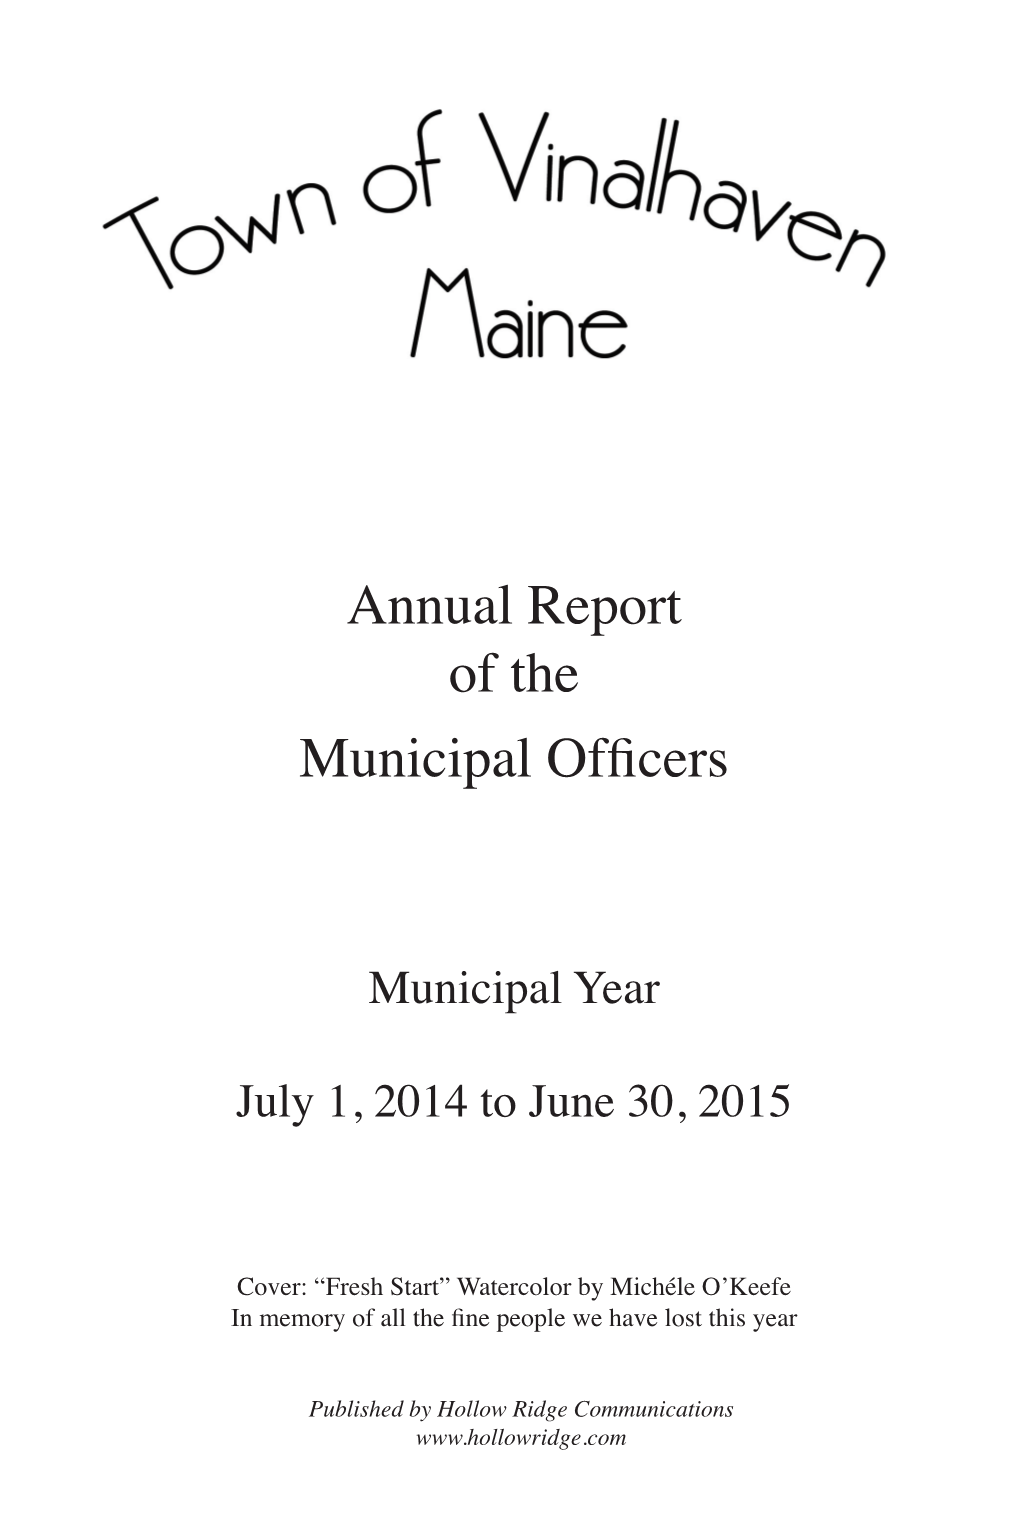 Annual Report of the Municipal Officers